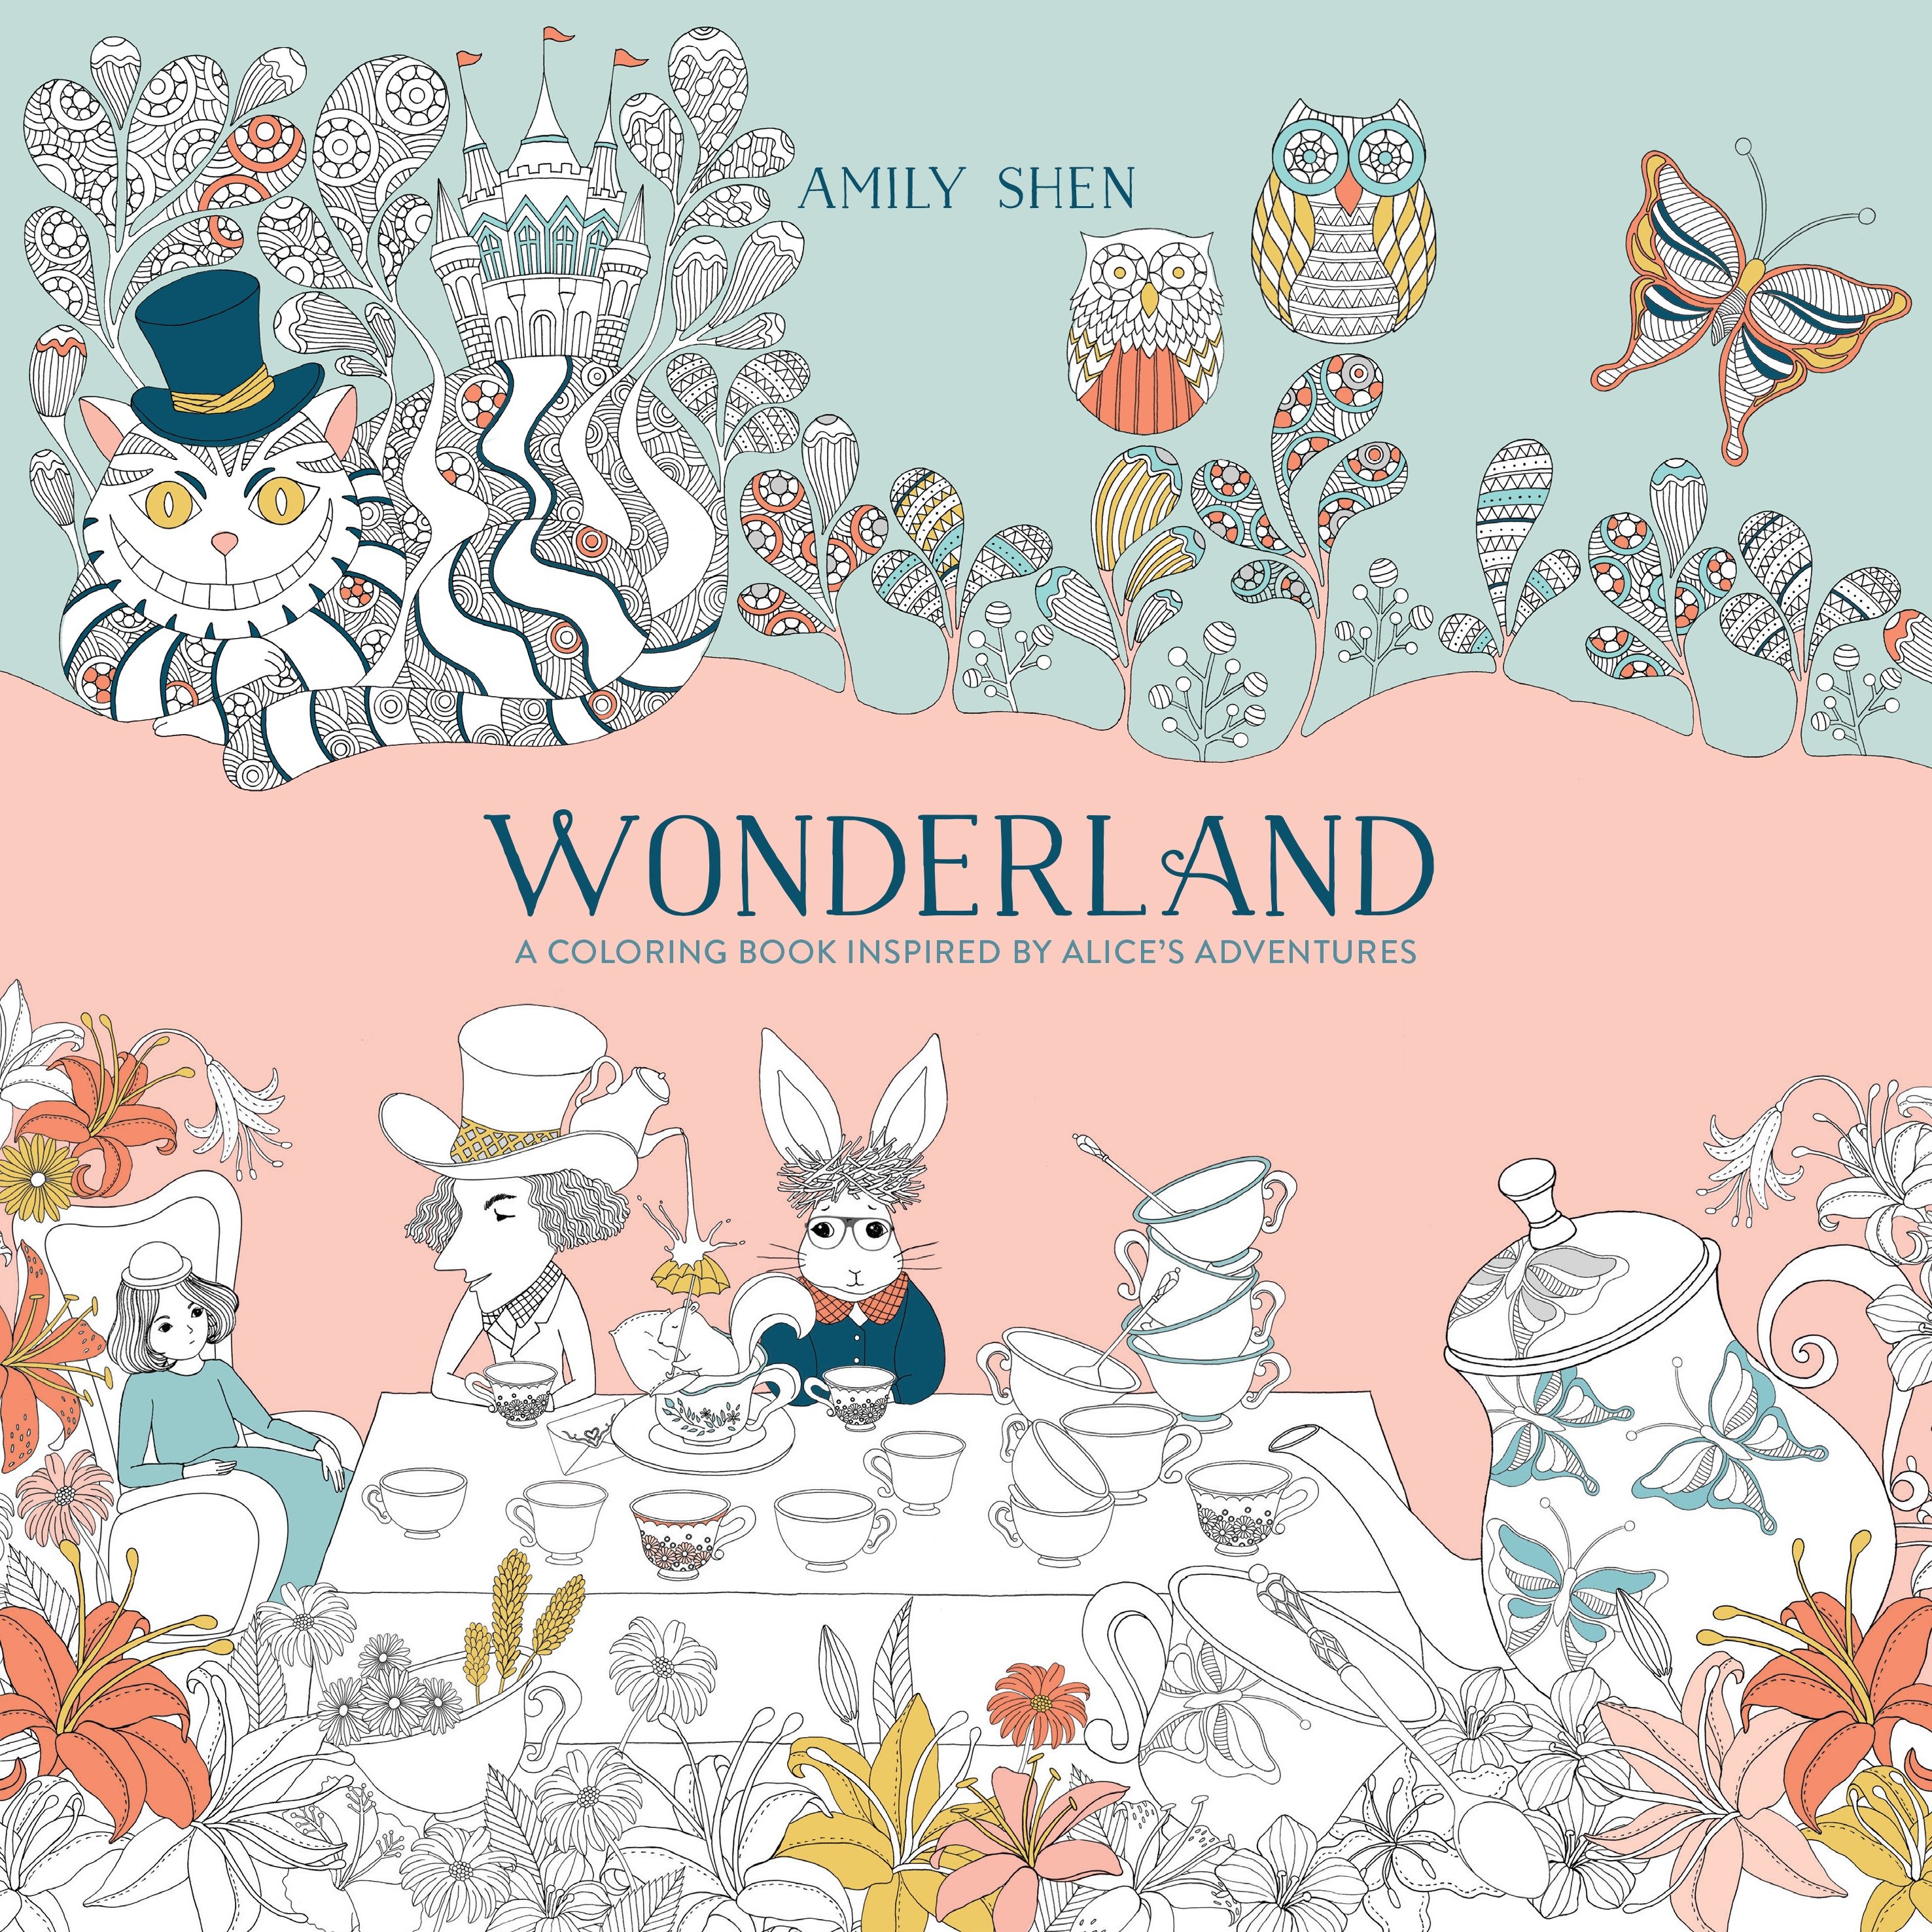 Wonderland Coloring Book Inspired By Alice's Adventures